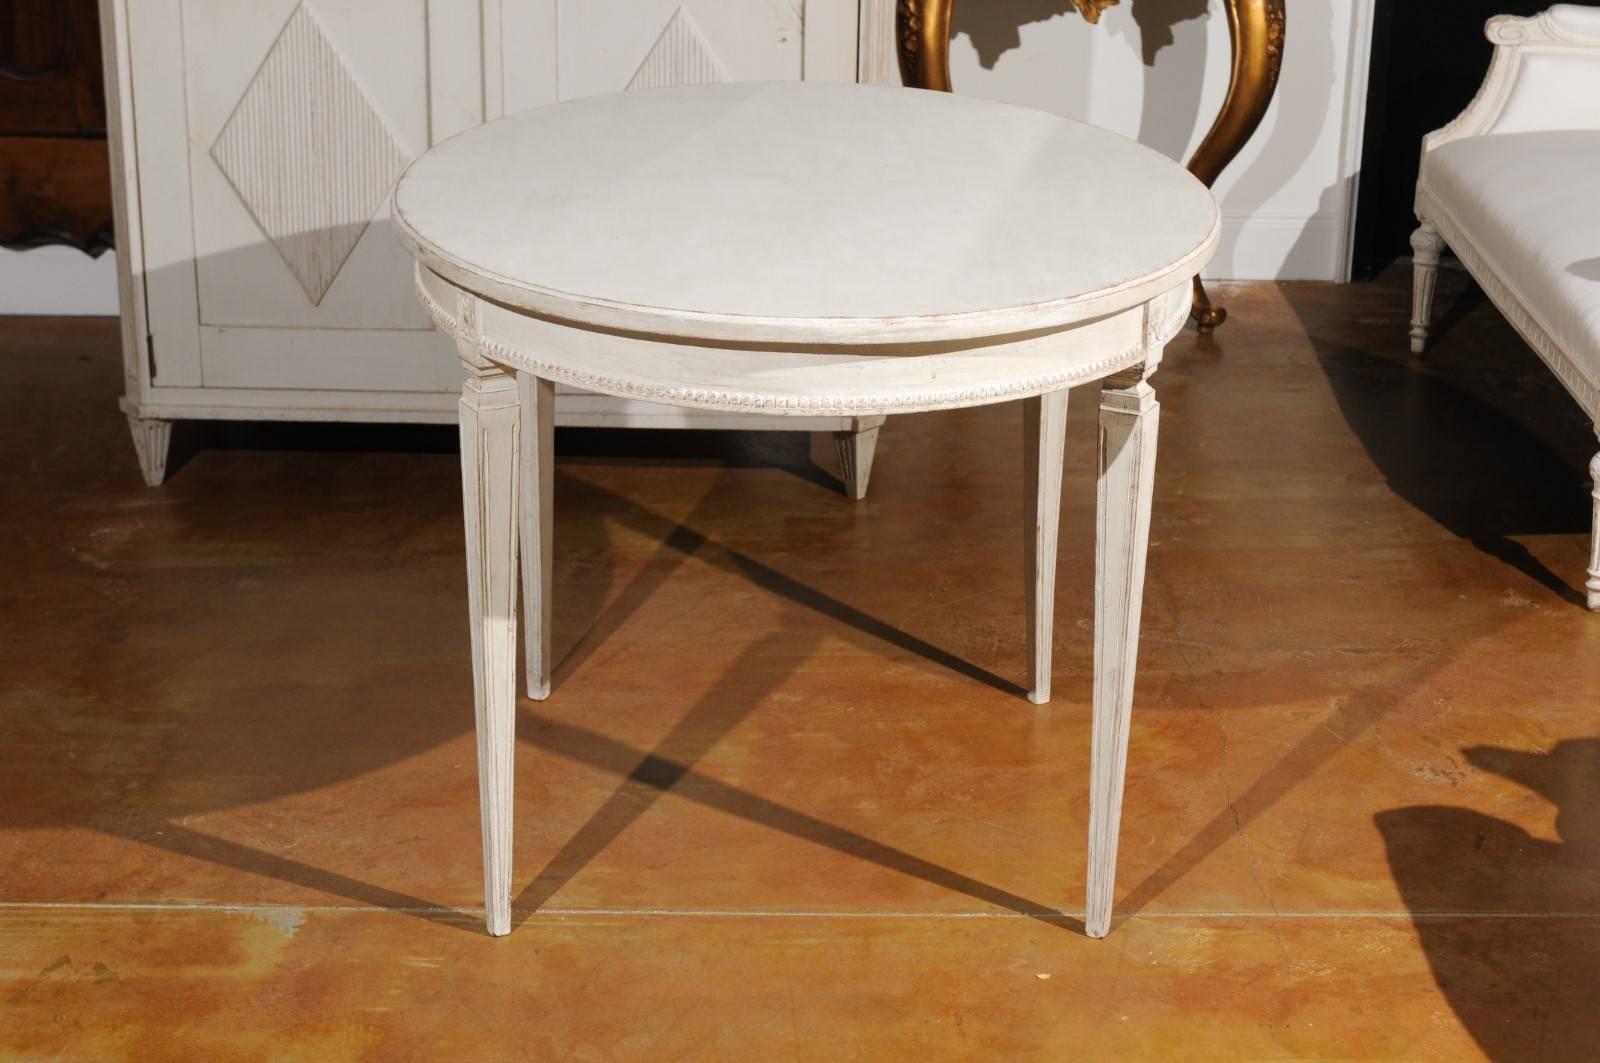 Wood Gustavian Style 1900s Swedish Painted Oval Table from Växjö with Beaded Motifs